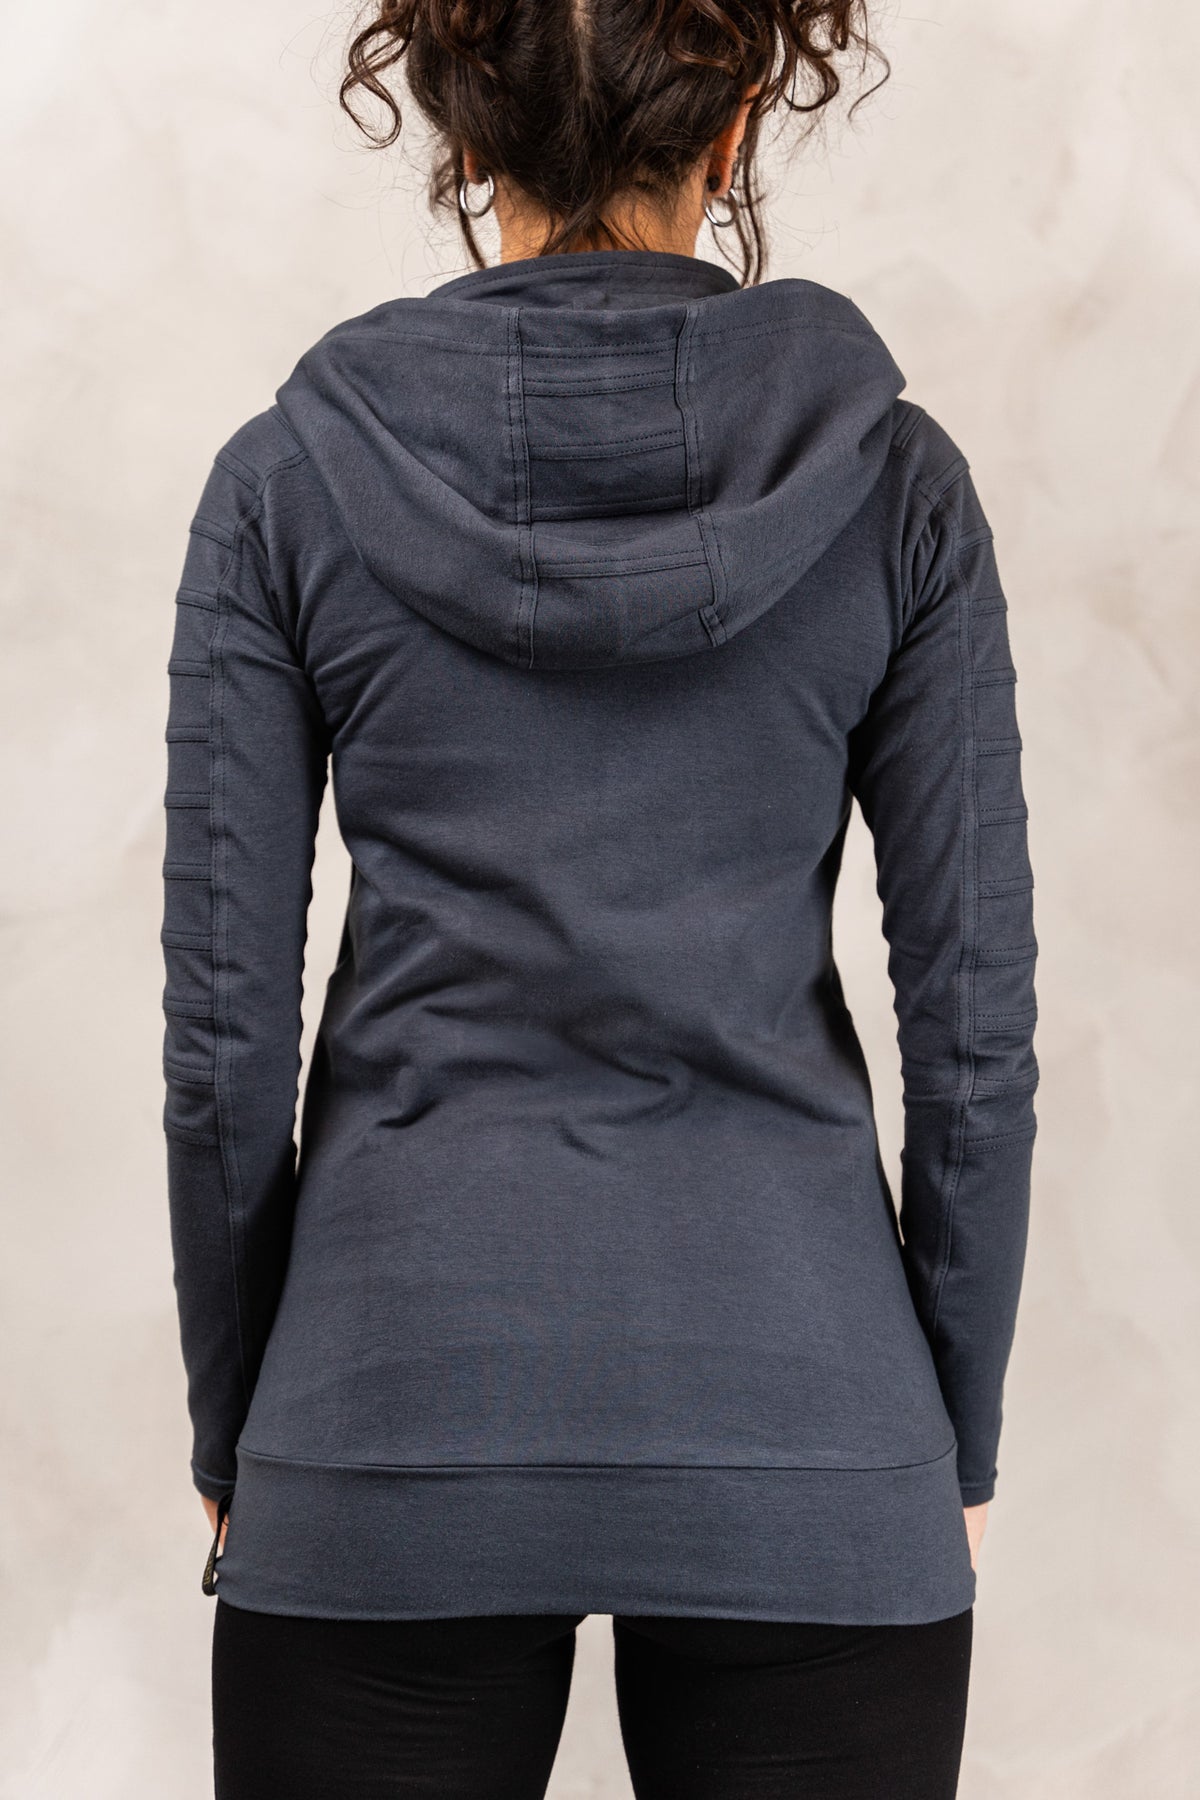 the back of a woman wearing a black hoodie